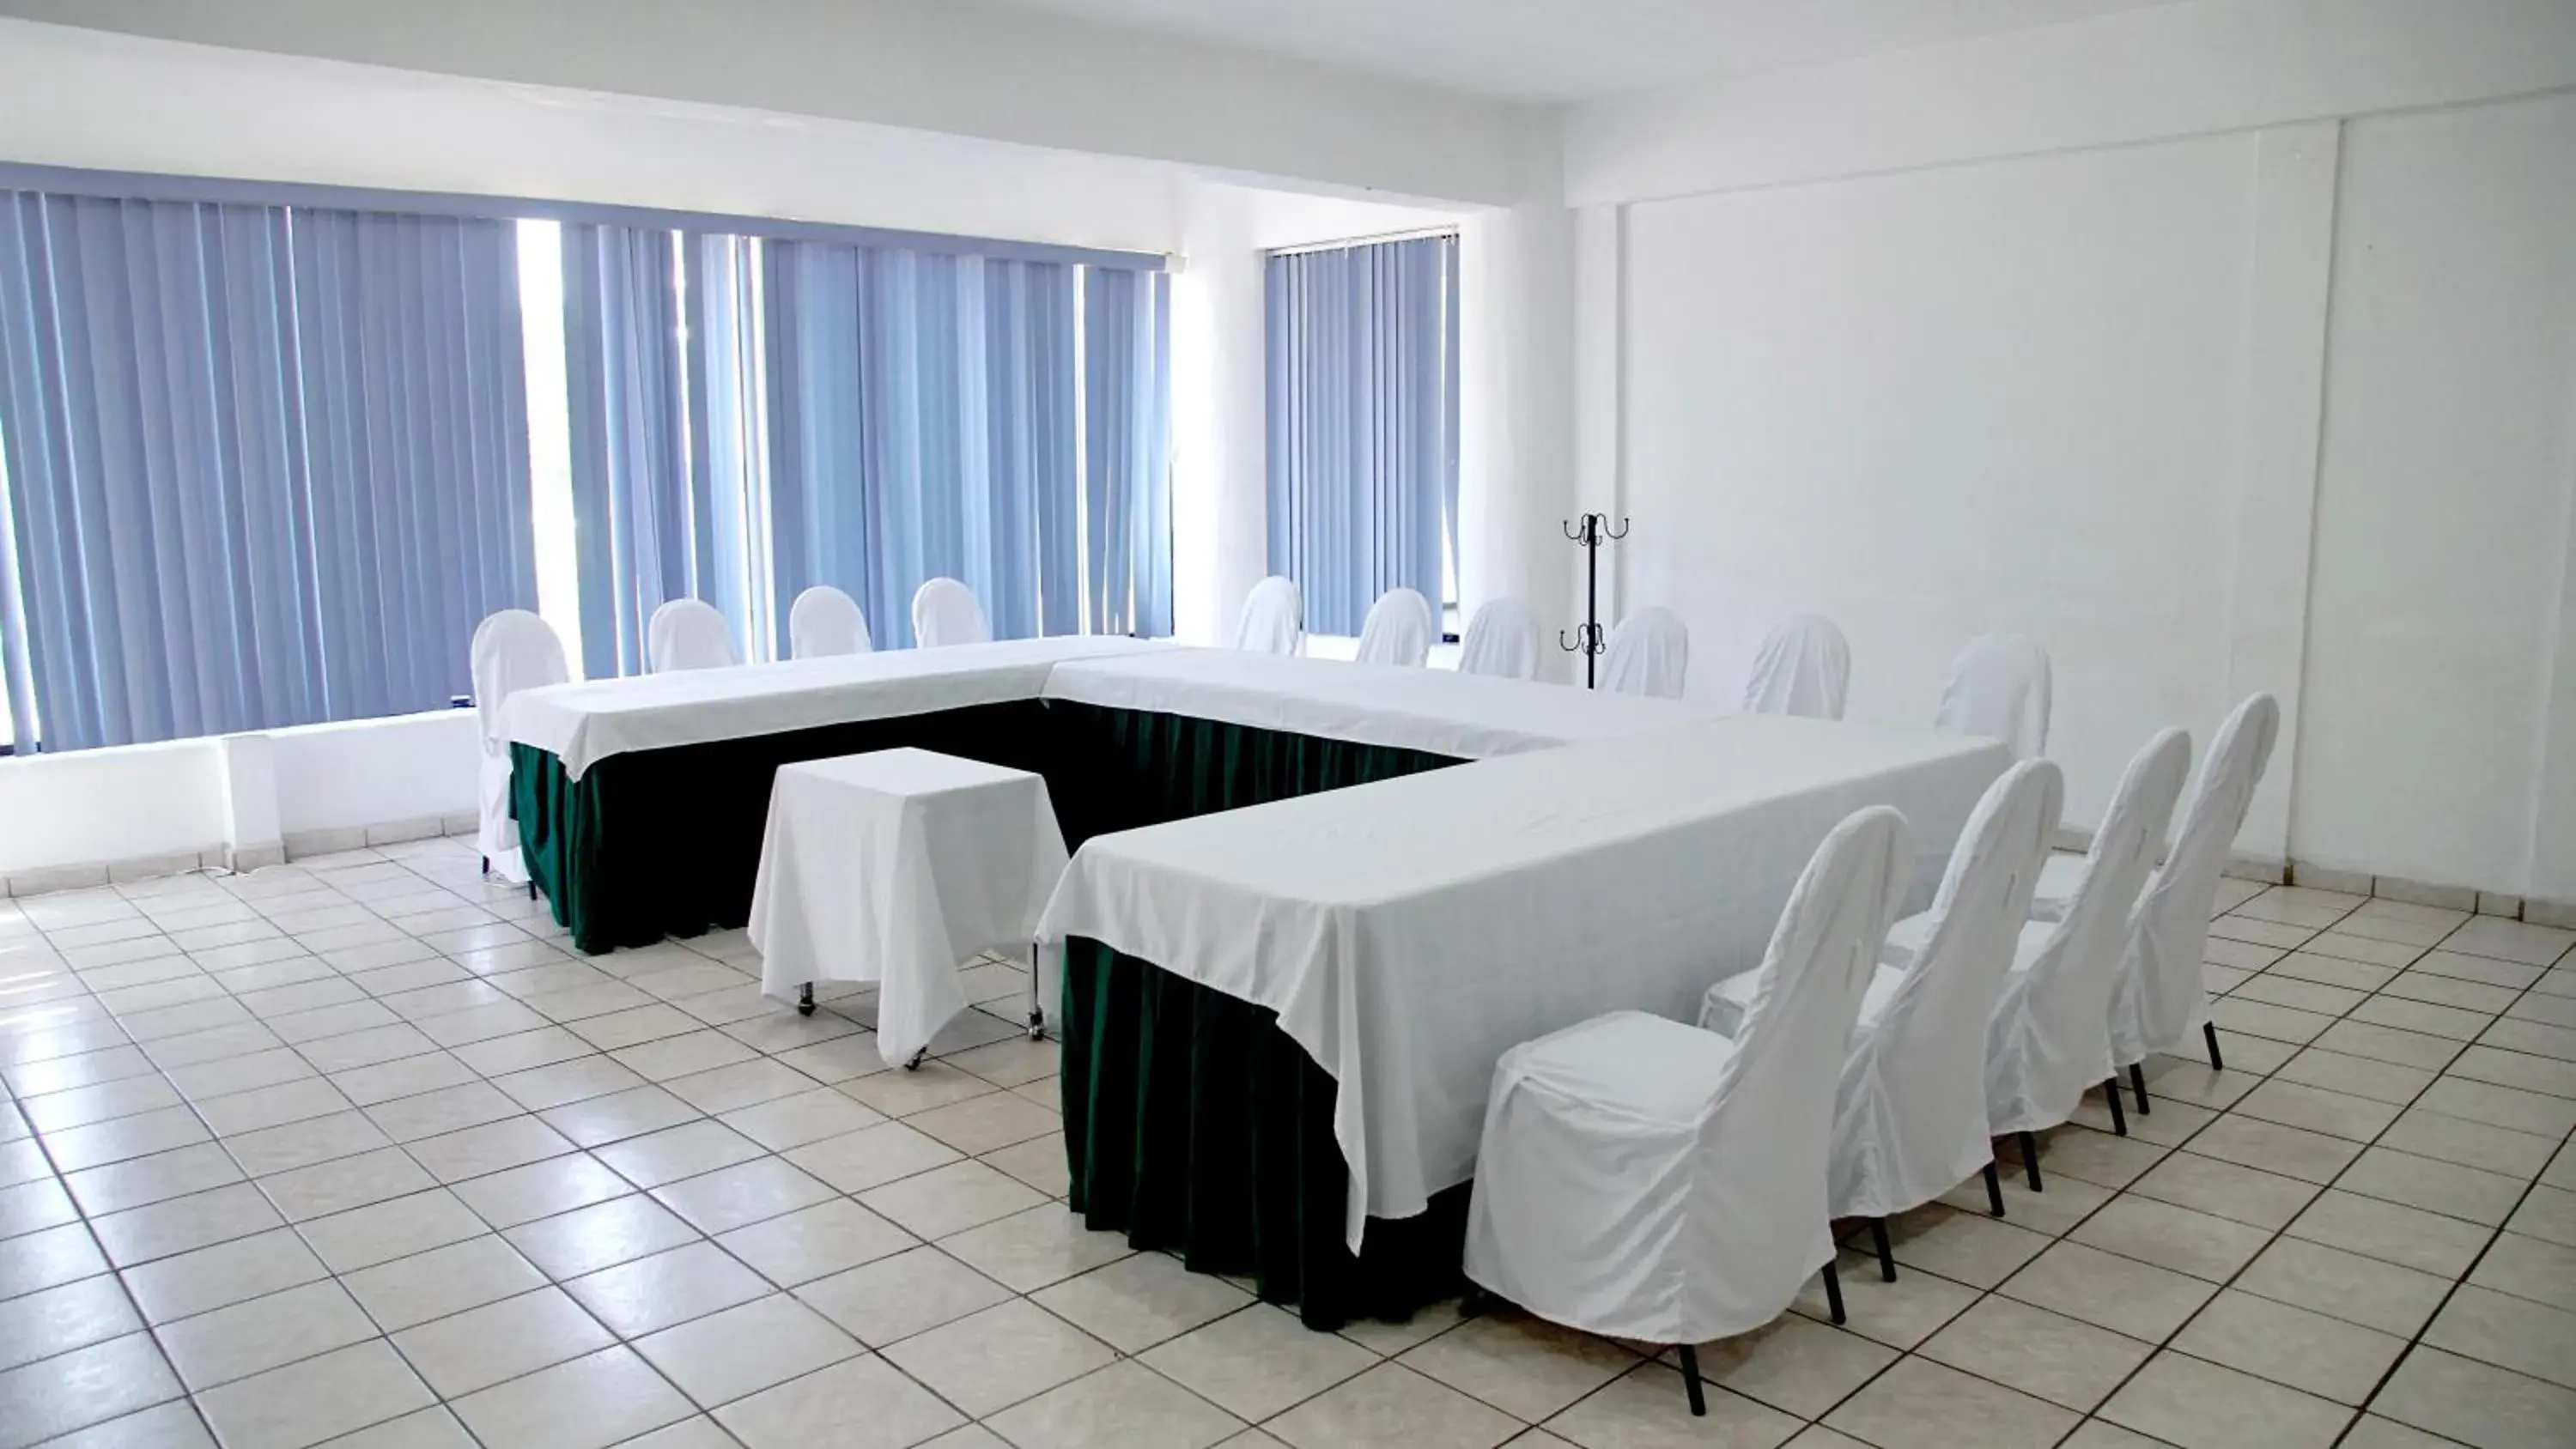 Meeting/conference room in Hotel Costa Brava